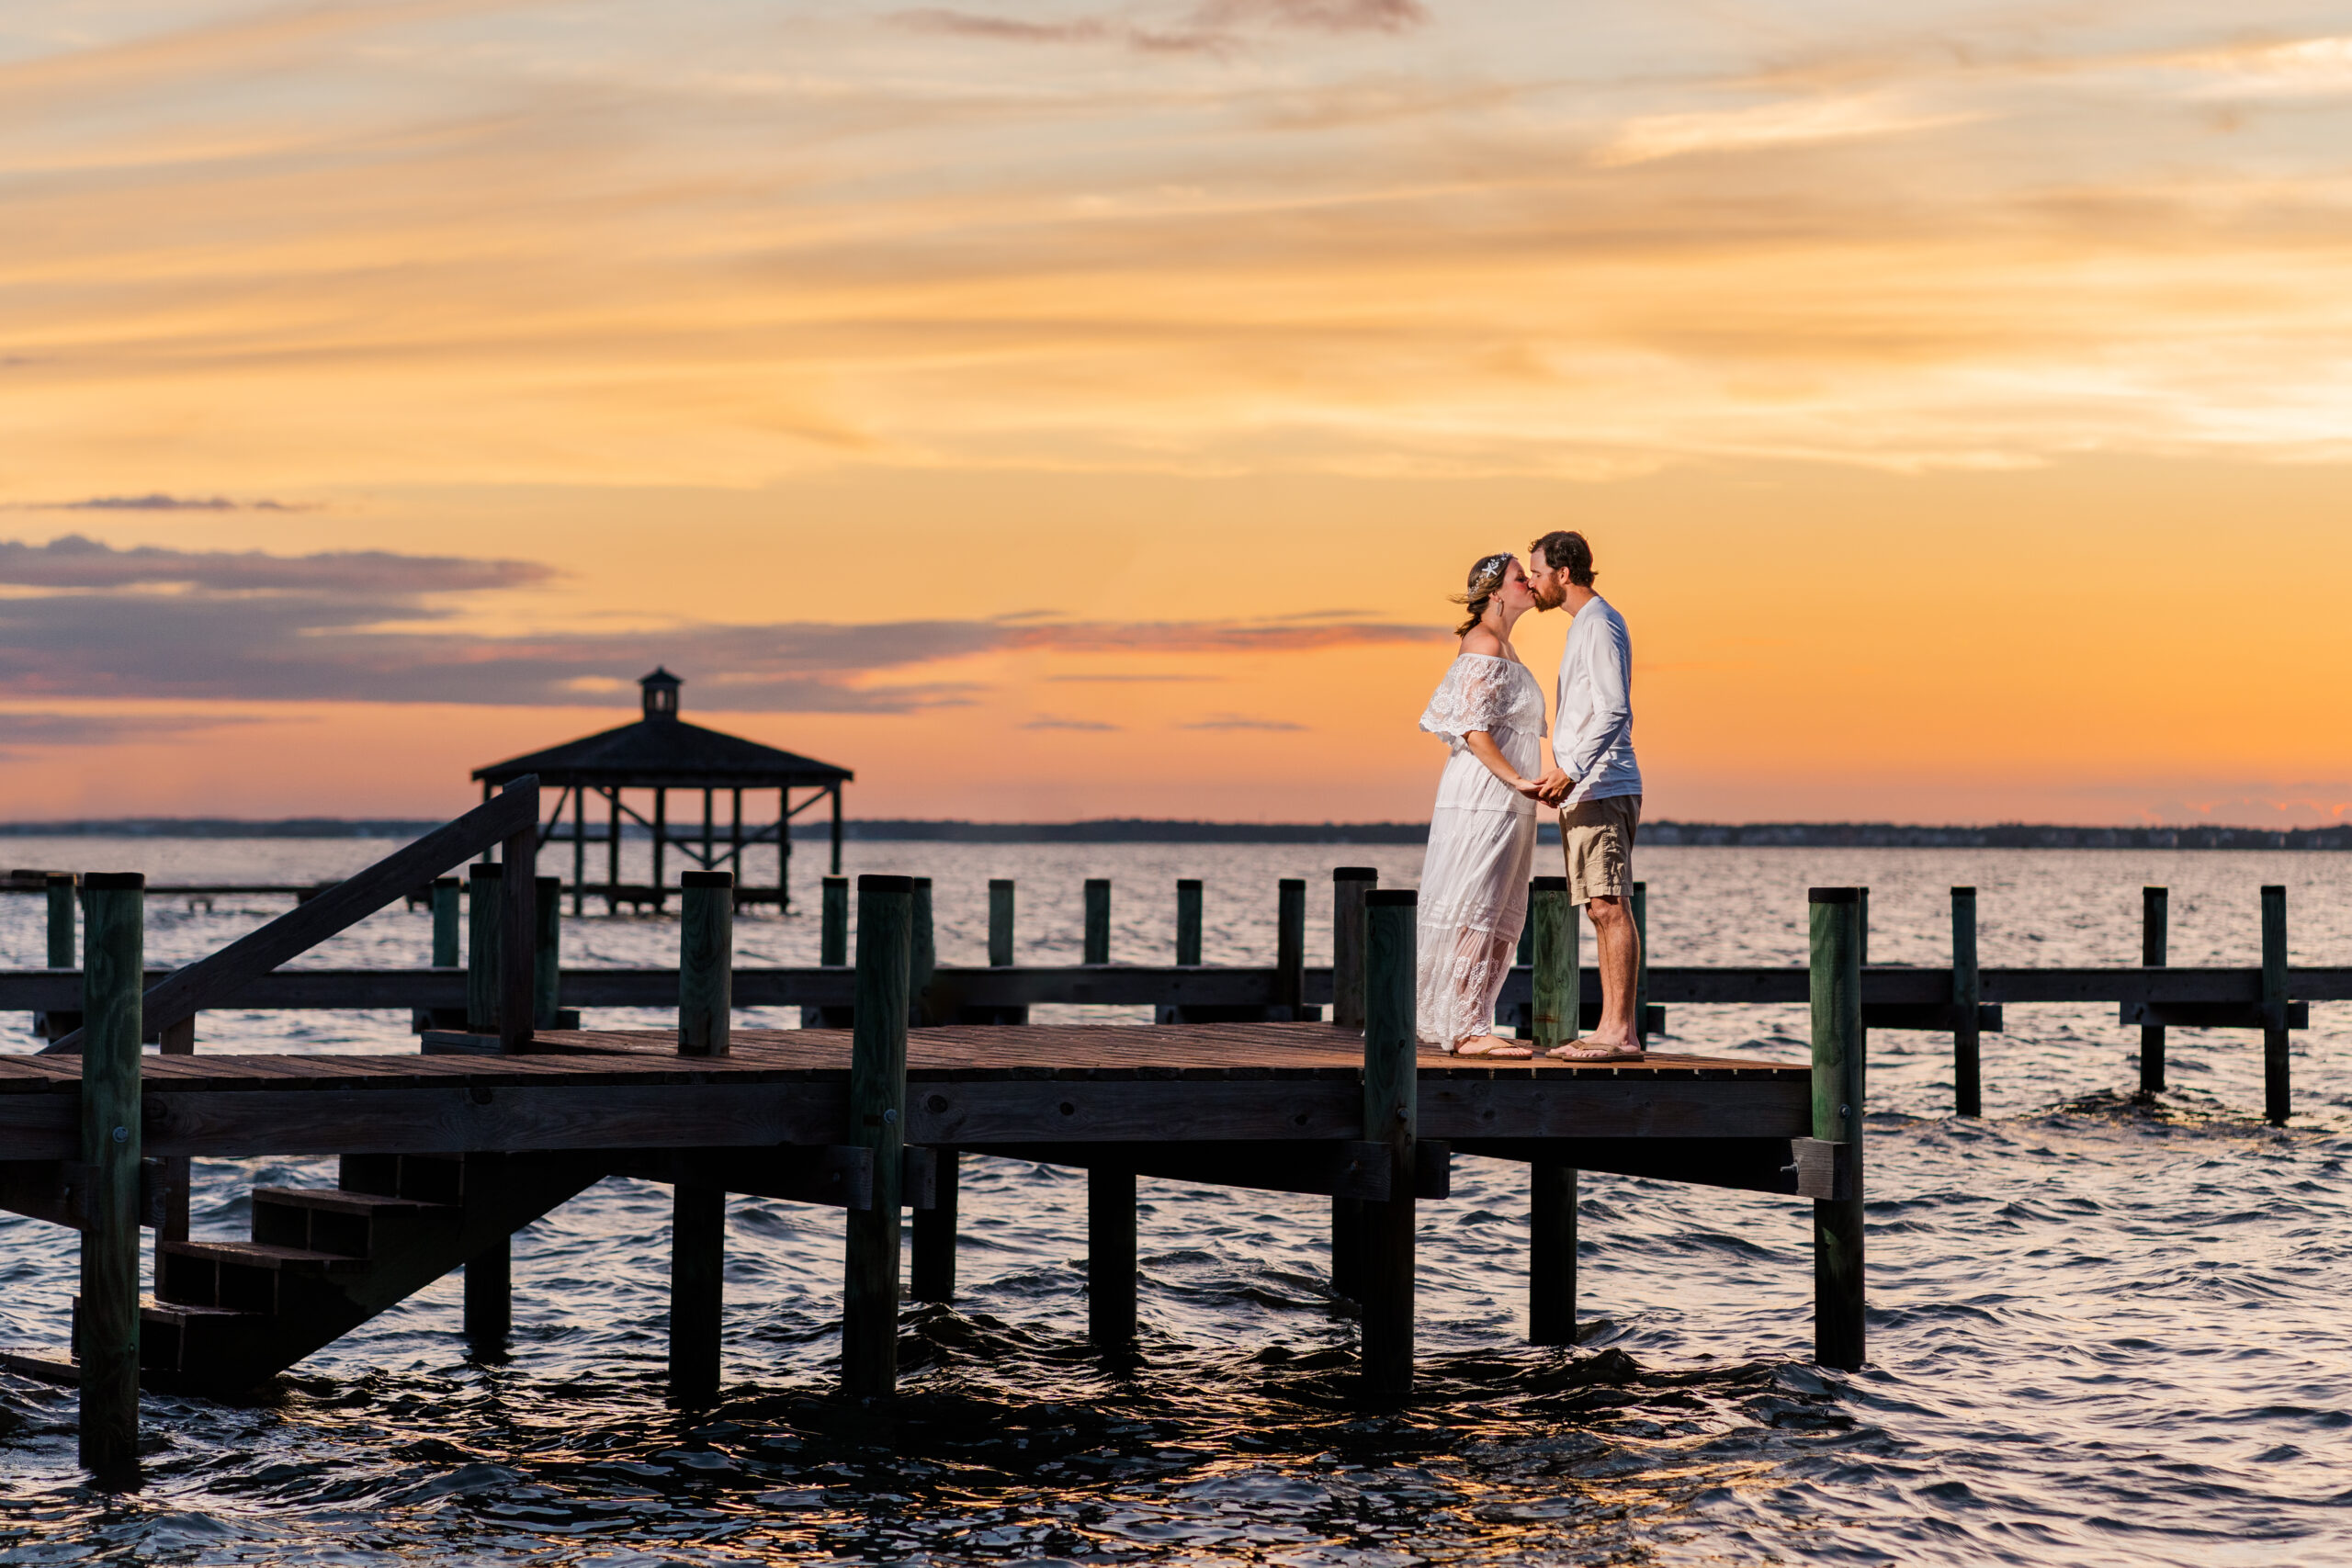 Katie and Jeffrey hold hands and kiss on a pier above the sound. The sunset blazes red, orange, and yellow behind them in the way that only beach sunsets can.